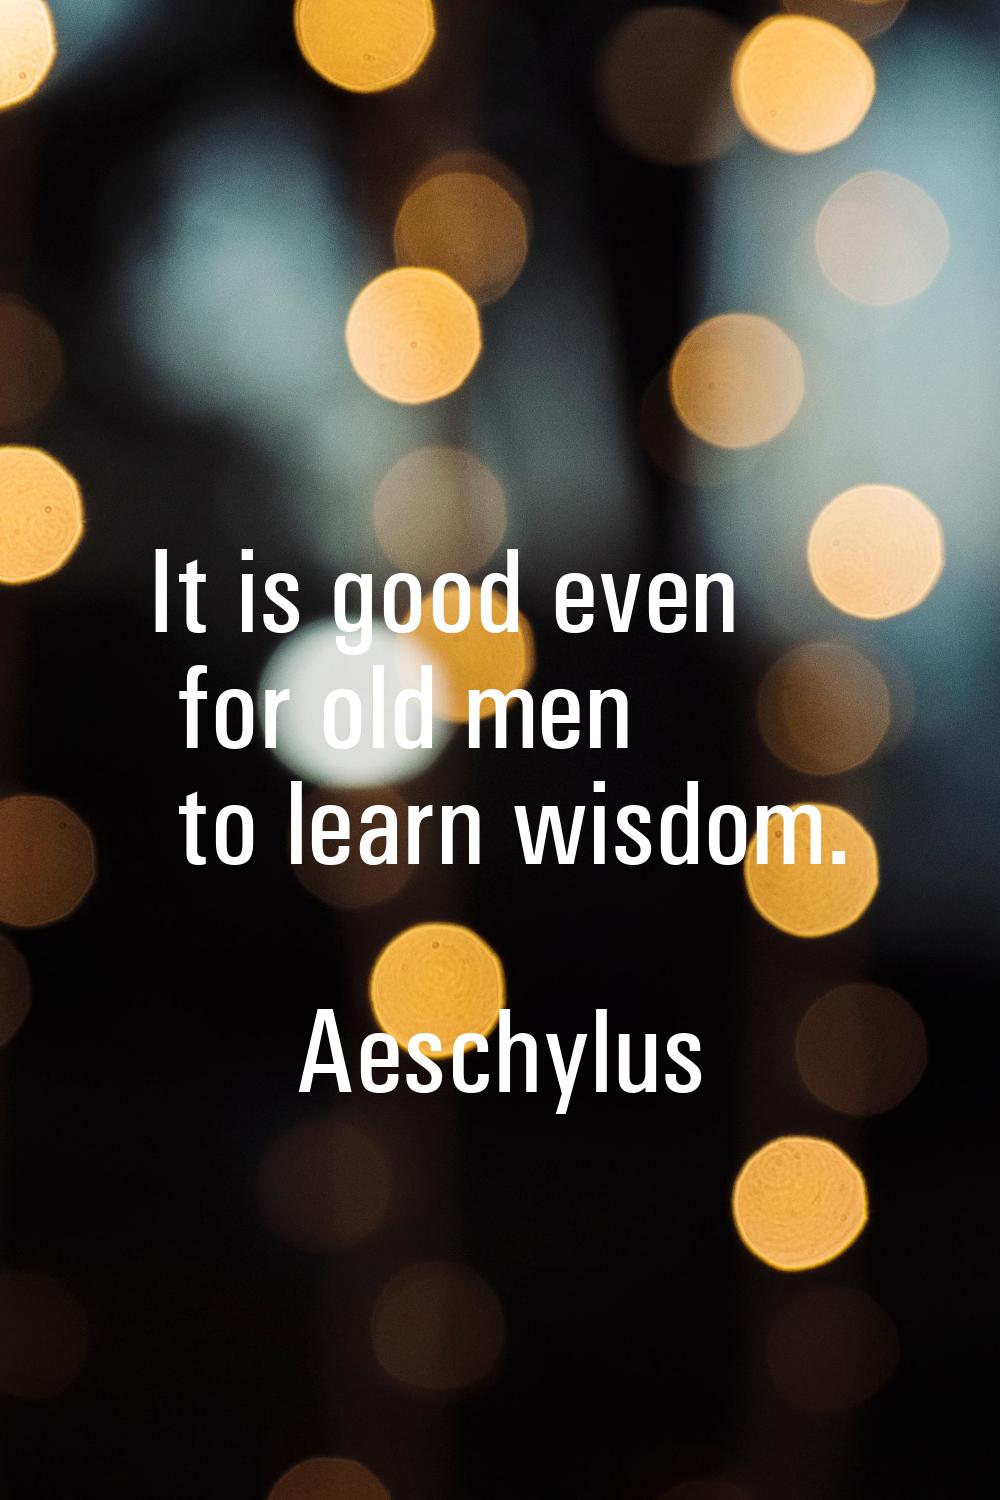 It is good even for old men to learn wisdom.